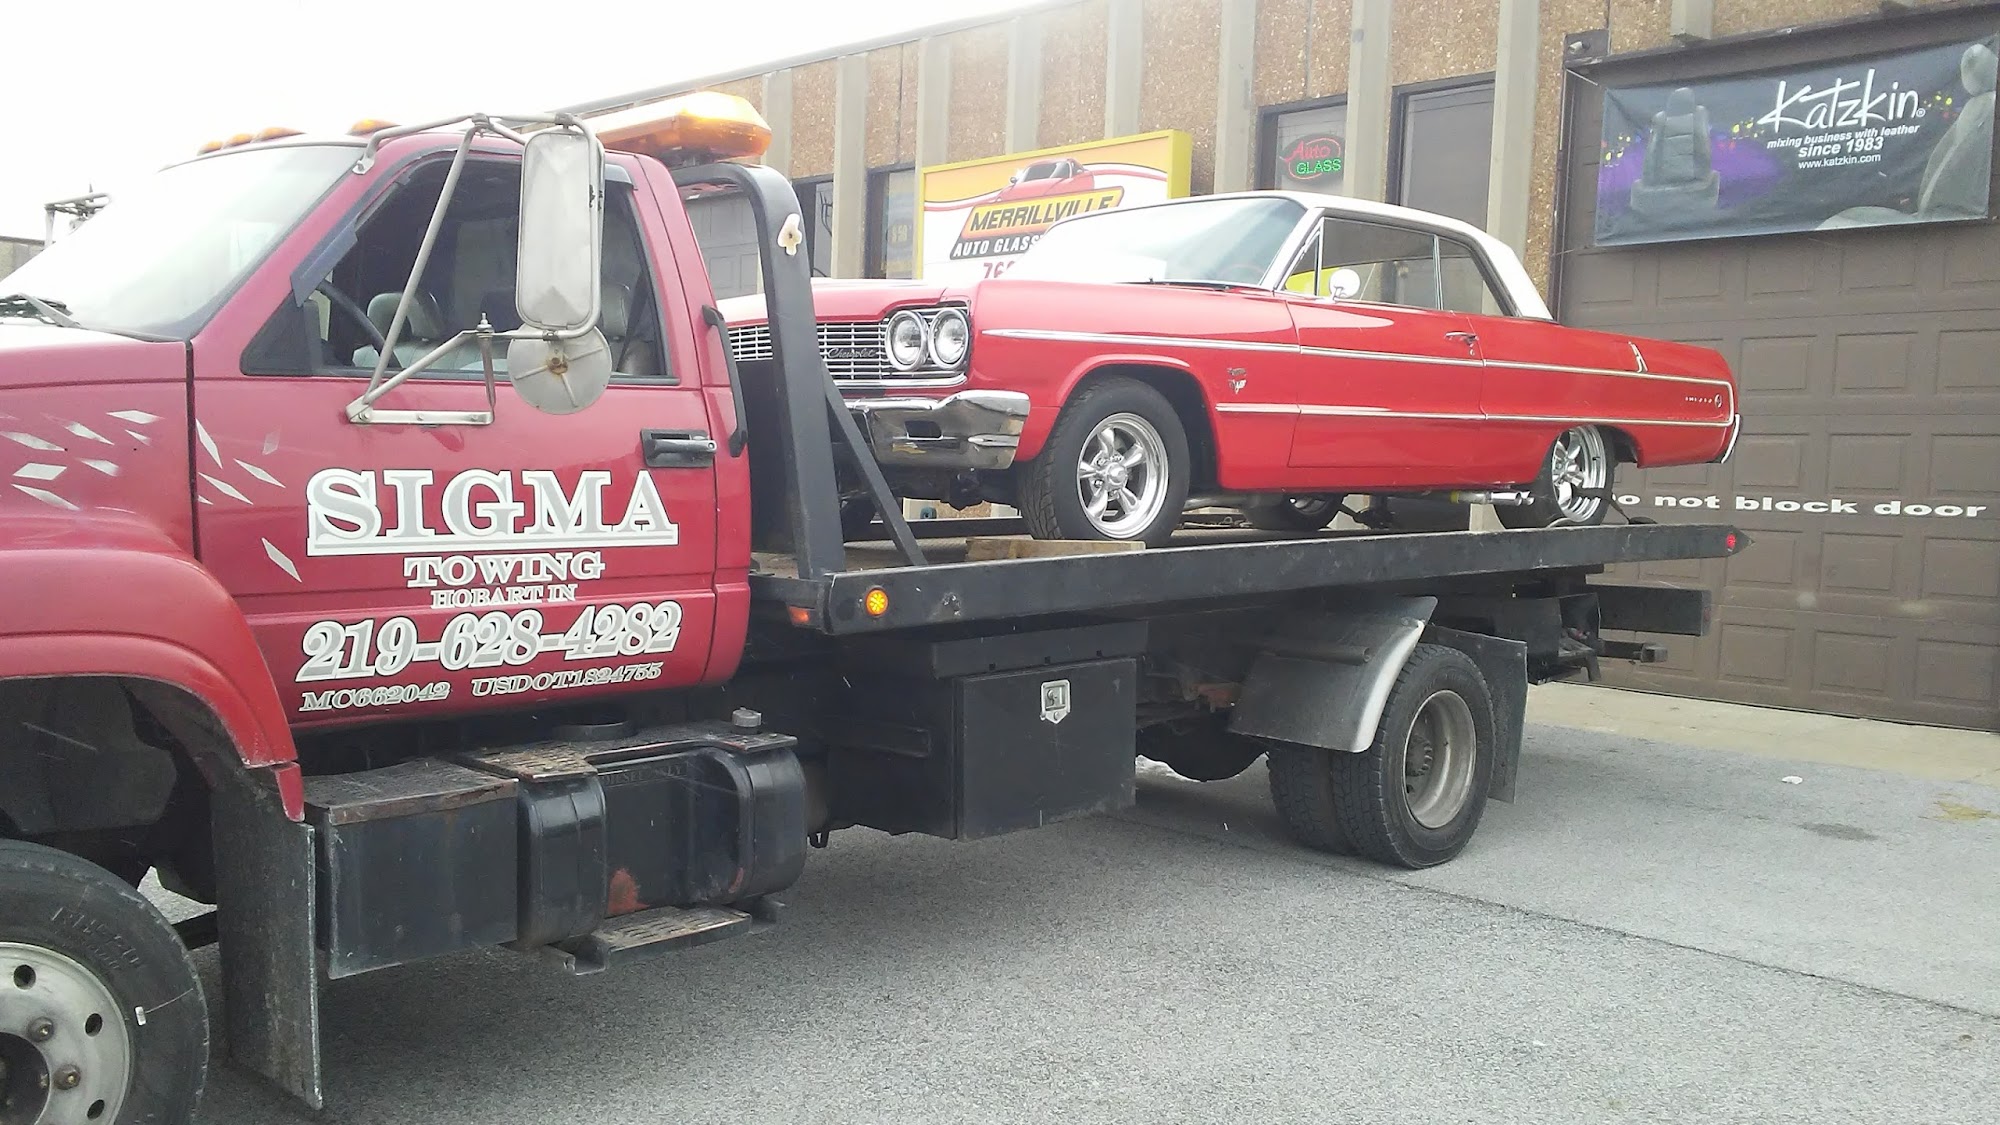 Sigma Towing 3311 Liverpool Rd, Lake Station Indiana 46405